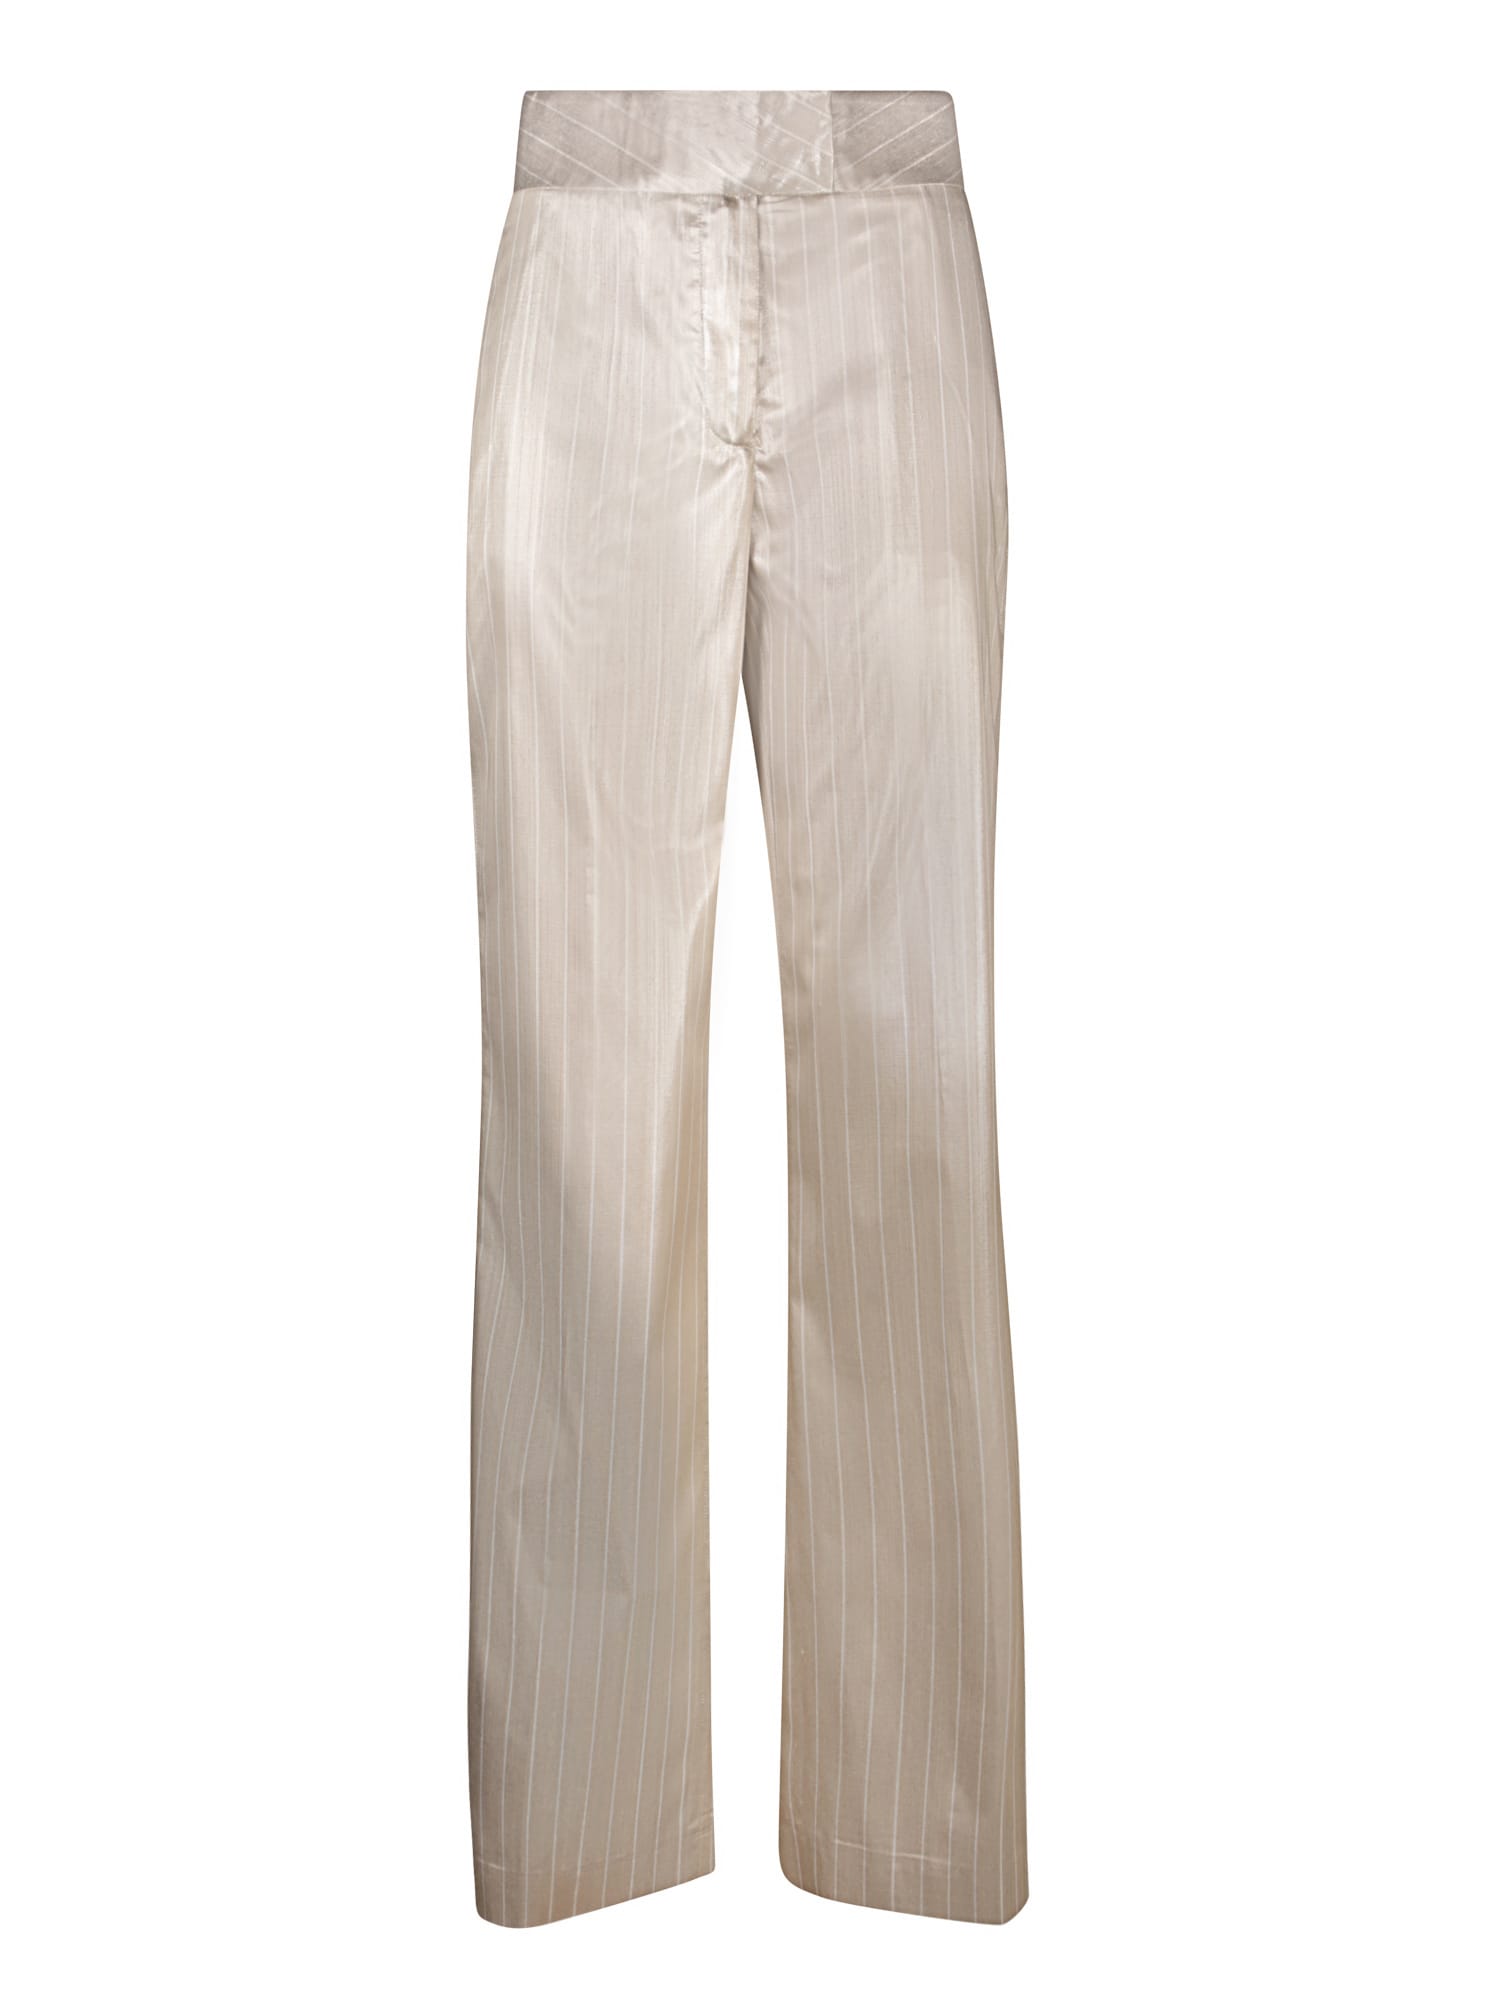 Satin Striped Sand Trousers